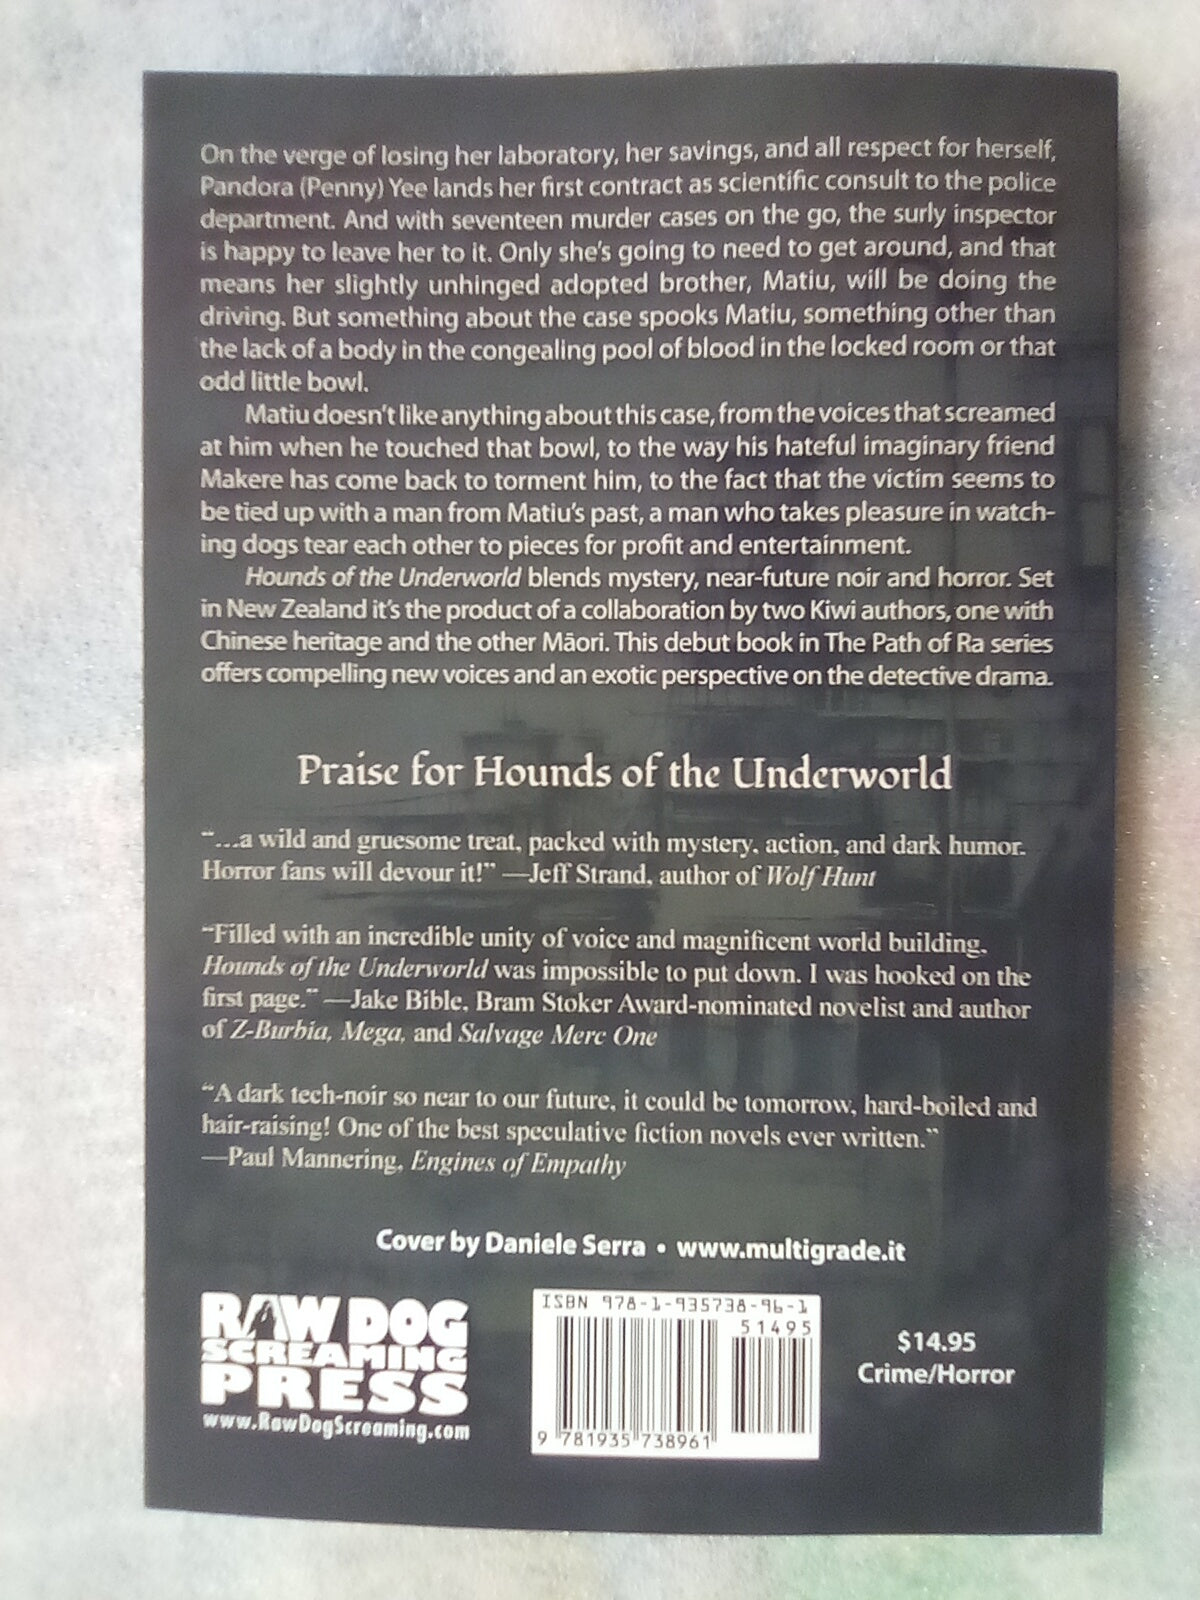 Hounds of the Underworld - The Path of Ra Book One by Lee Murray (Signed Copy)